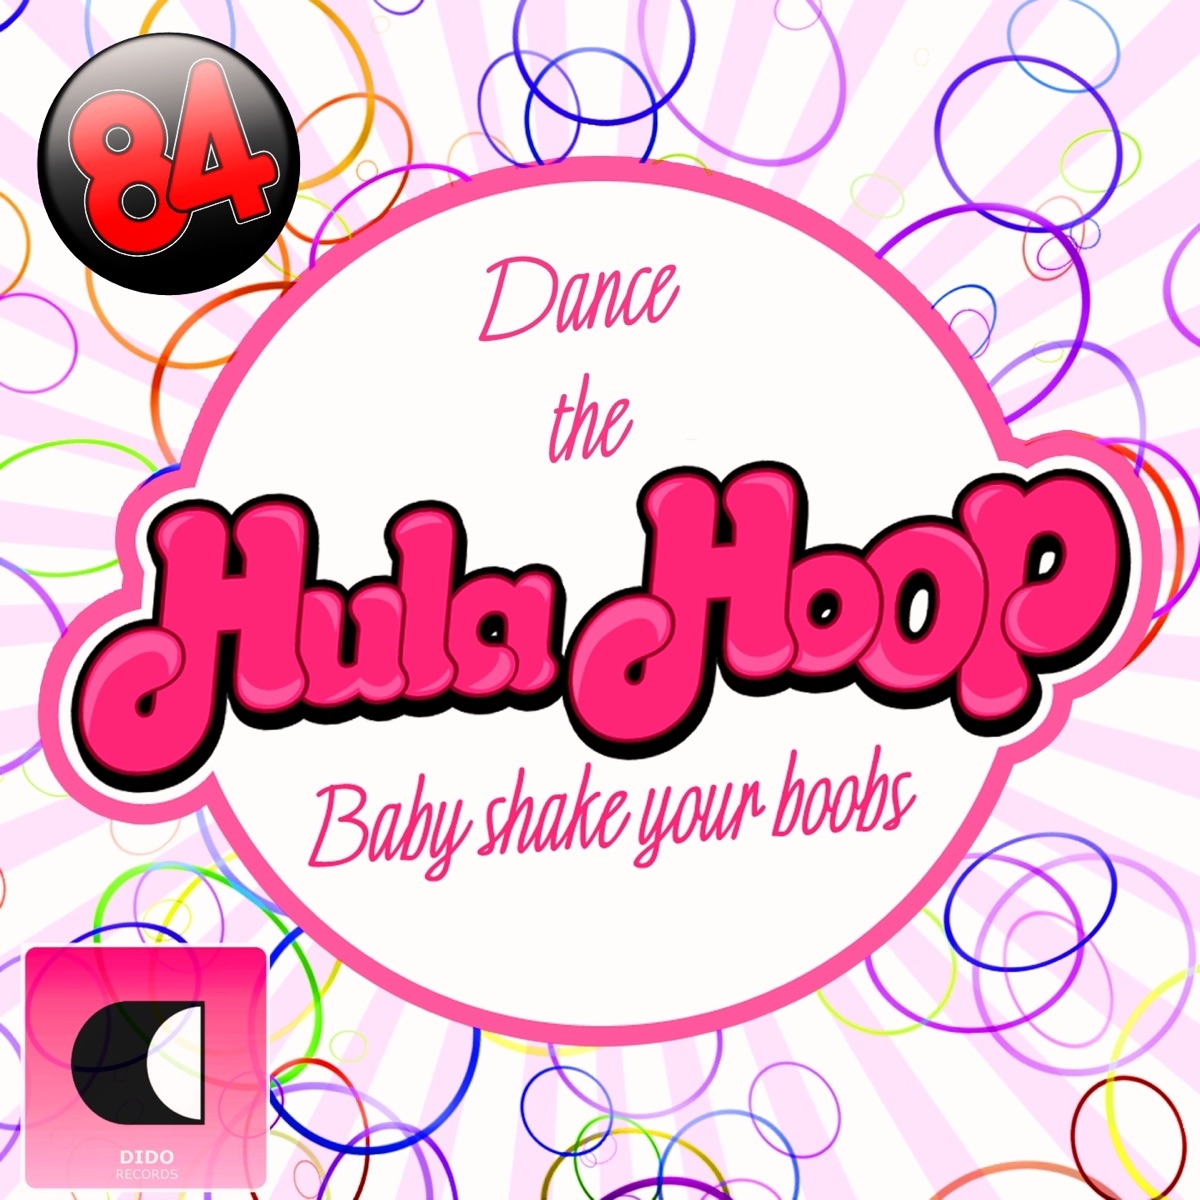 Dance the Hula Hoop (Baby Shake Your Boobs) - EP - Album by 84 - Apple Music